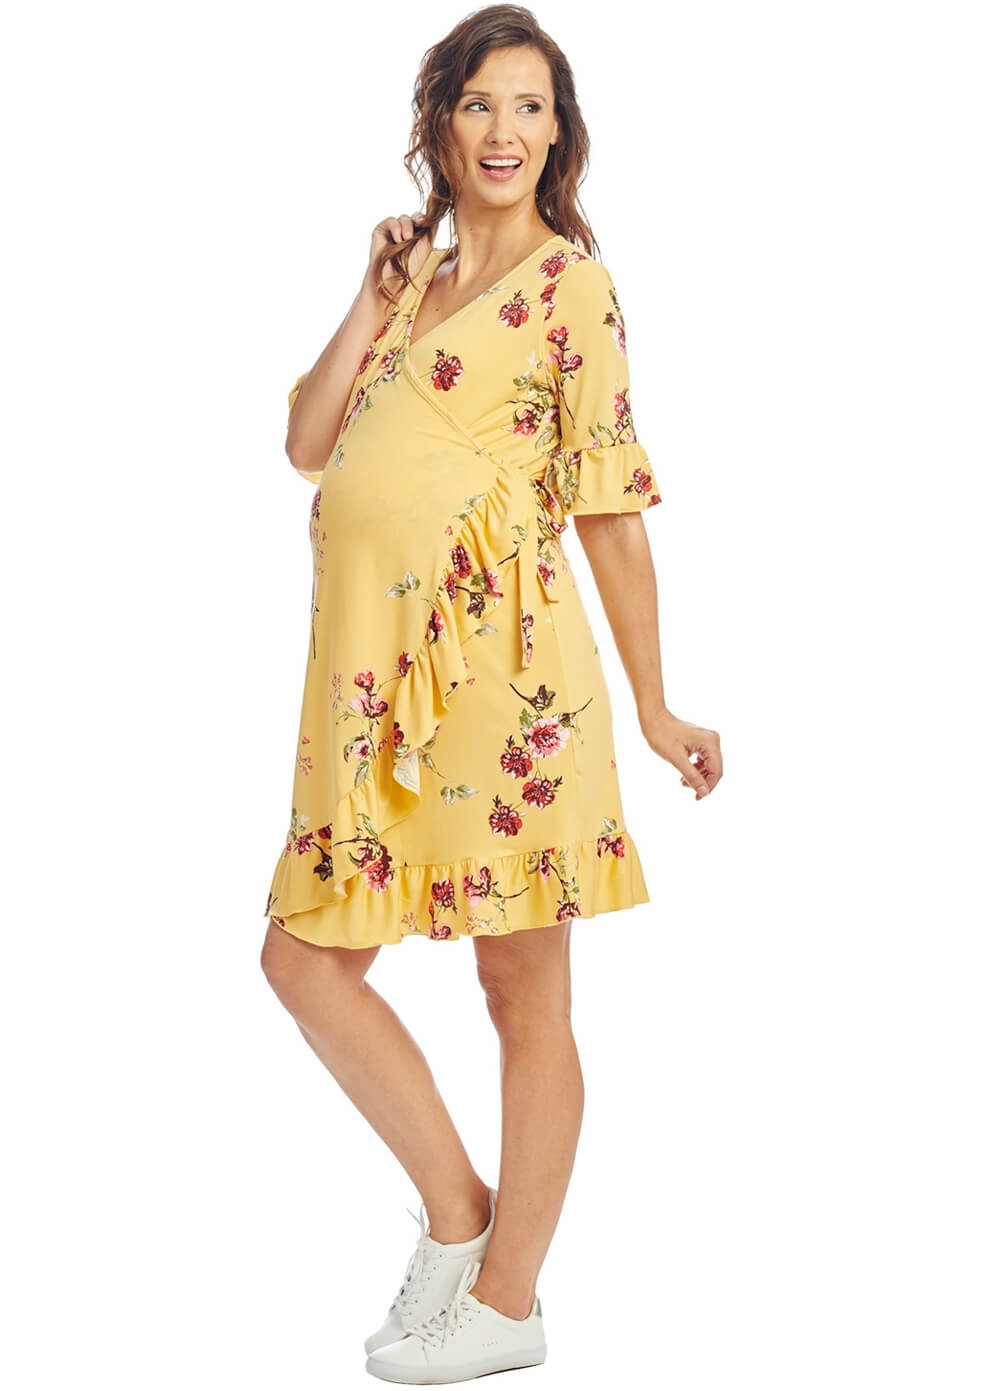 Leilani Nursing Wrap Dress in Yellow Floral by Everly Grey